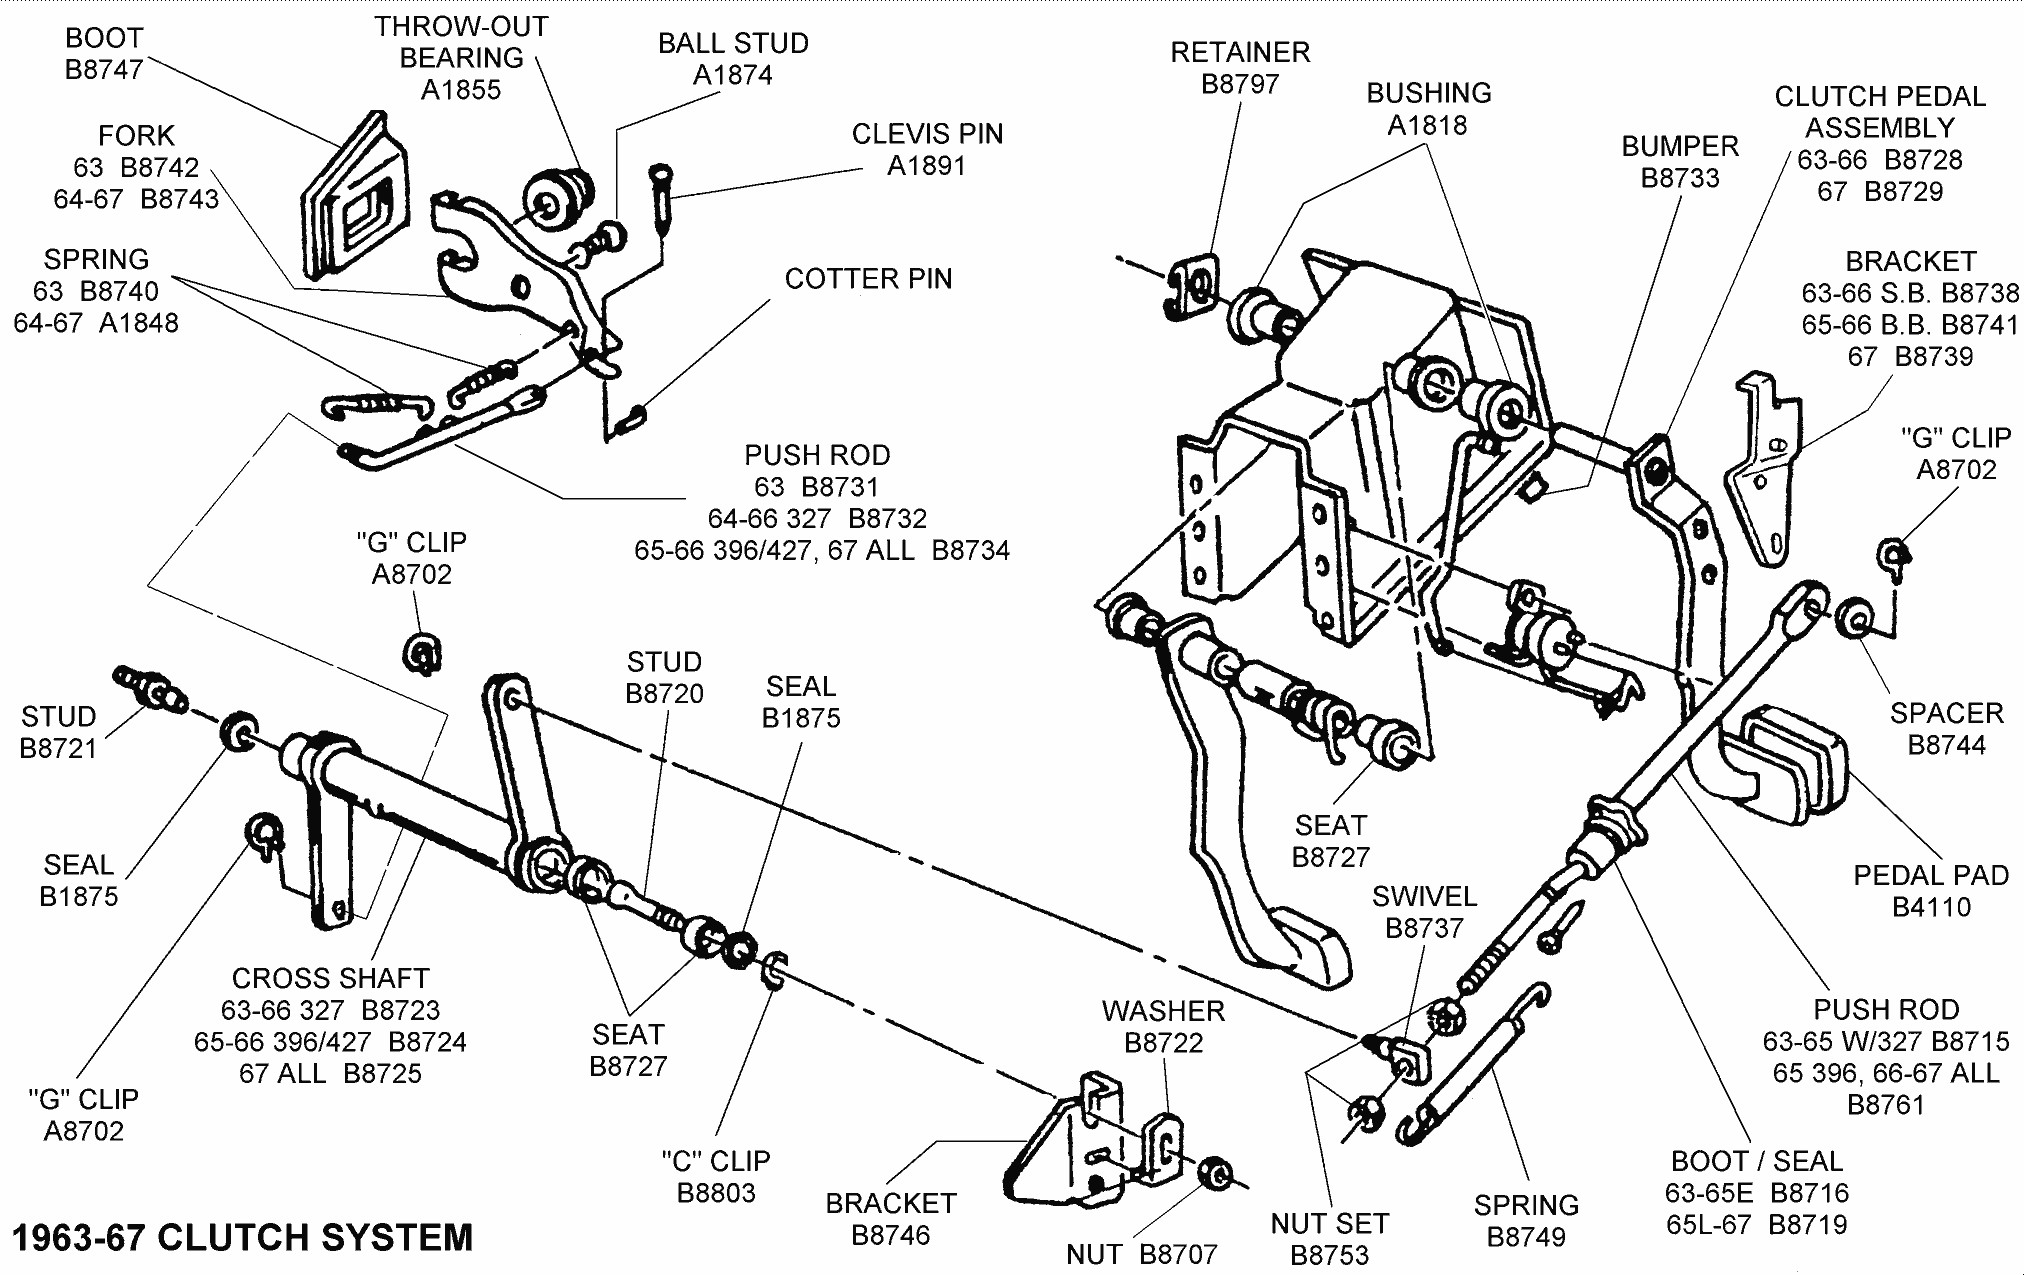 Clutch System Diagram 1964 Lincoln Continental Wiring Diagram 1964 Lincoln Continental Of Clutch System Diagram